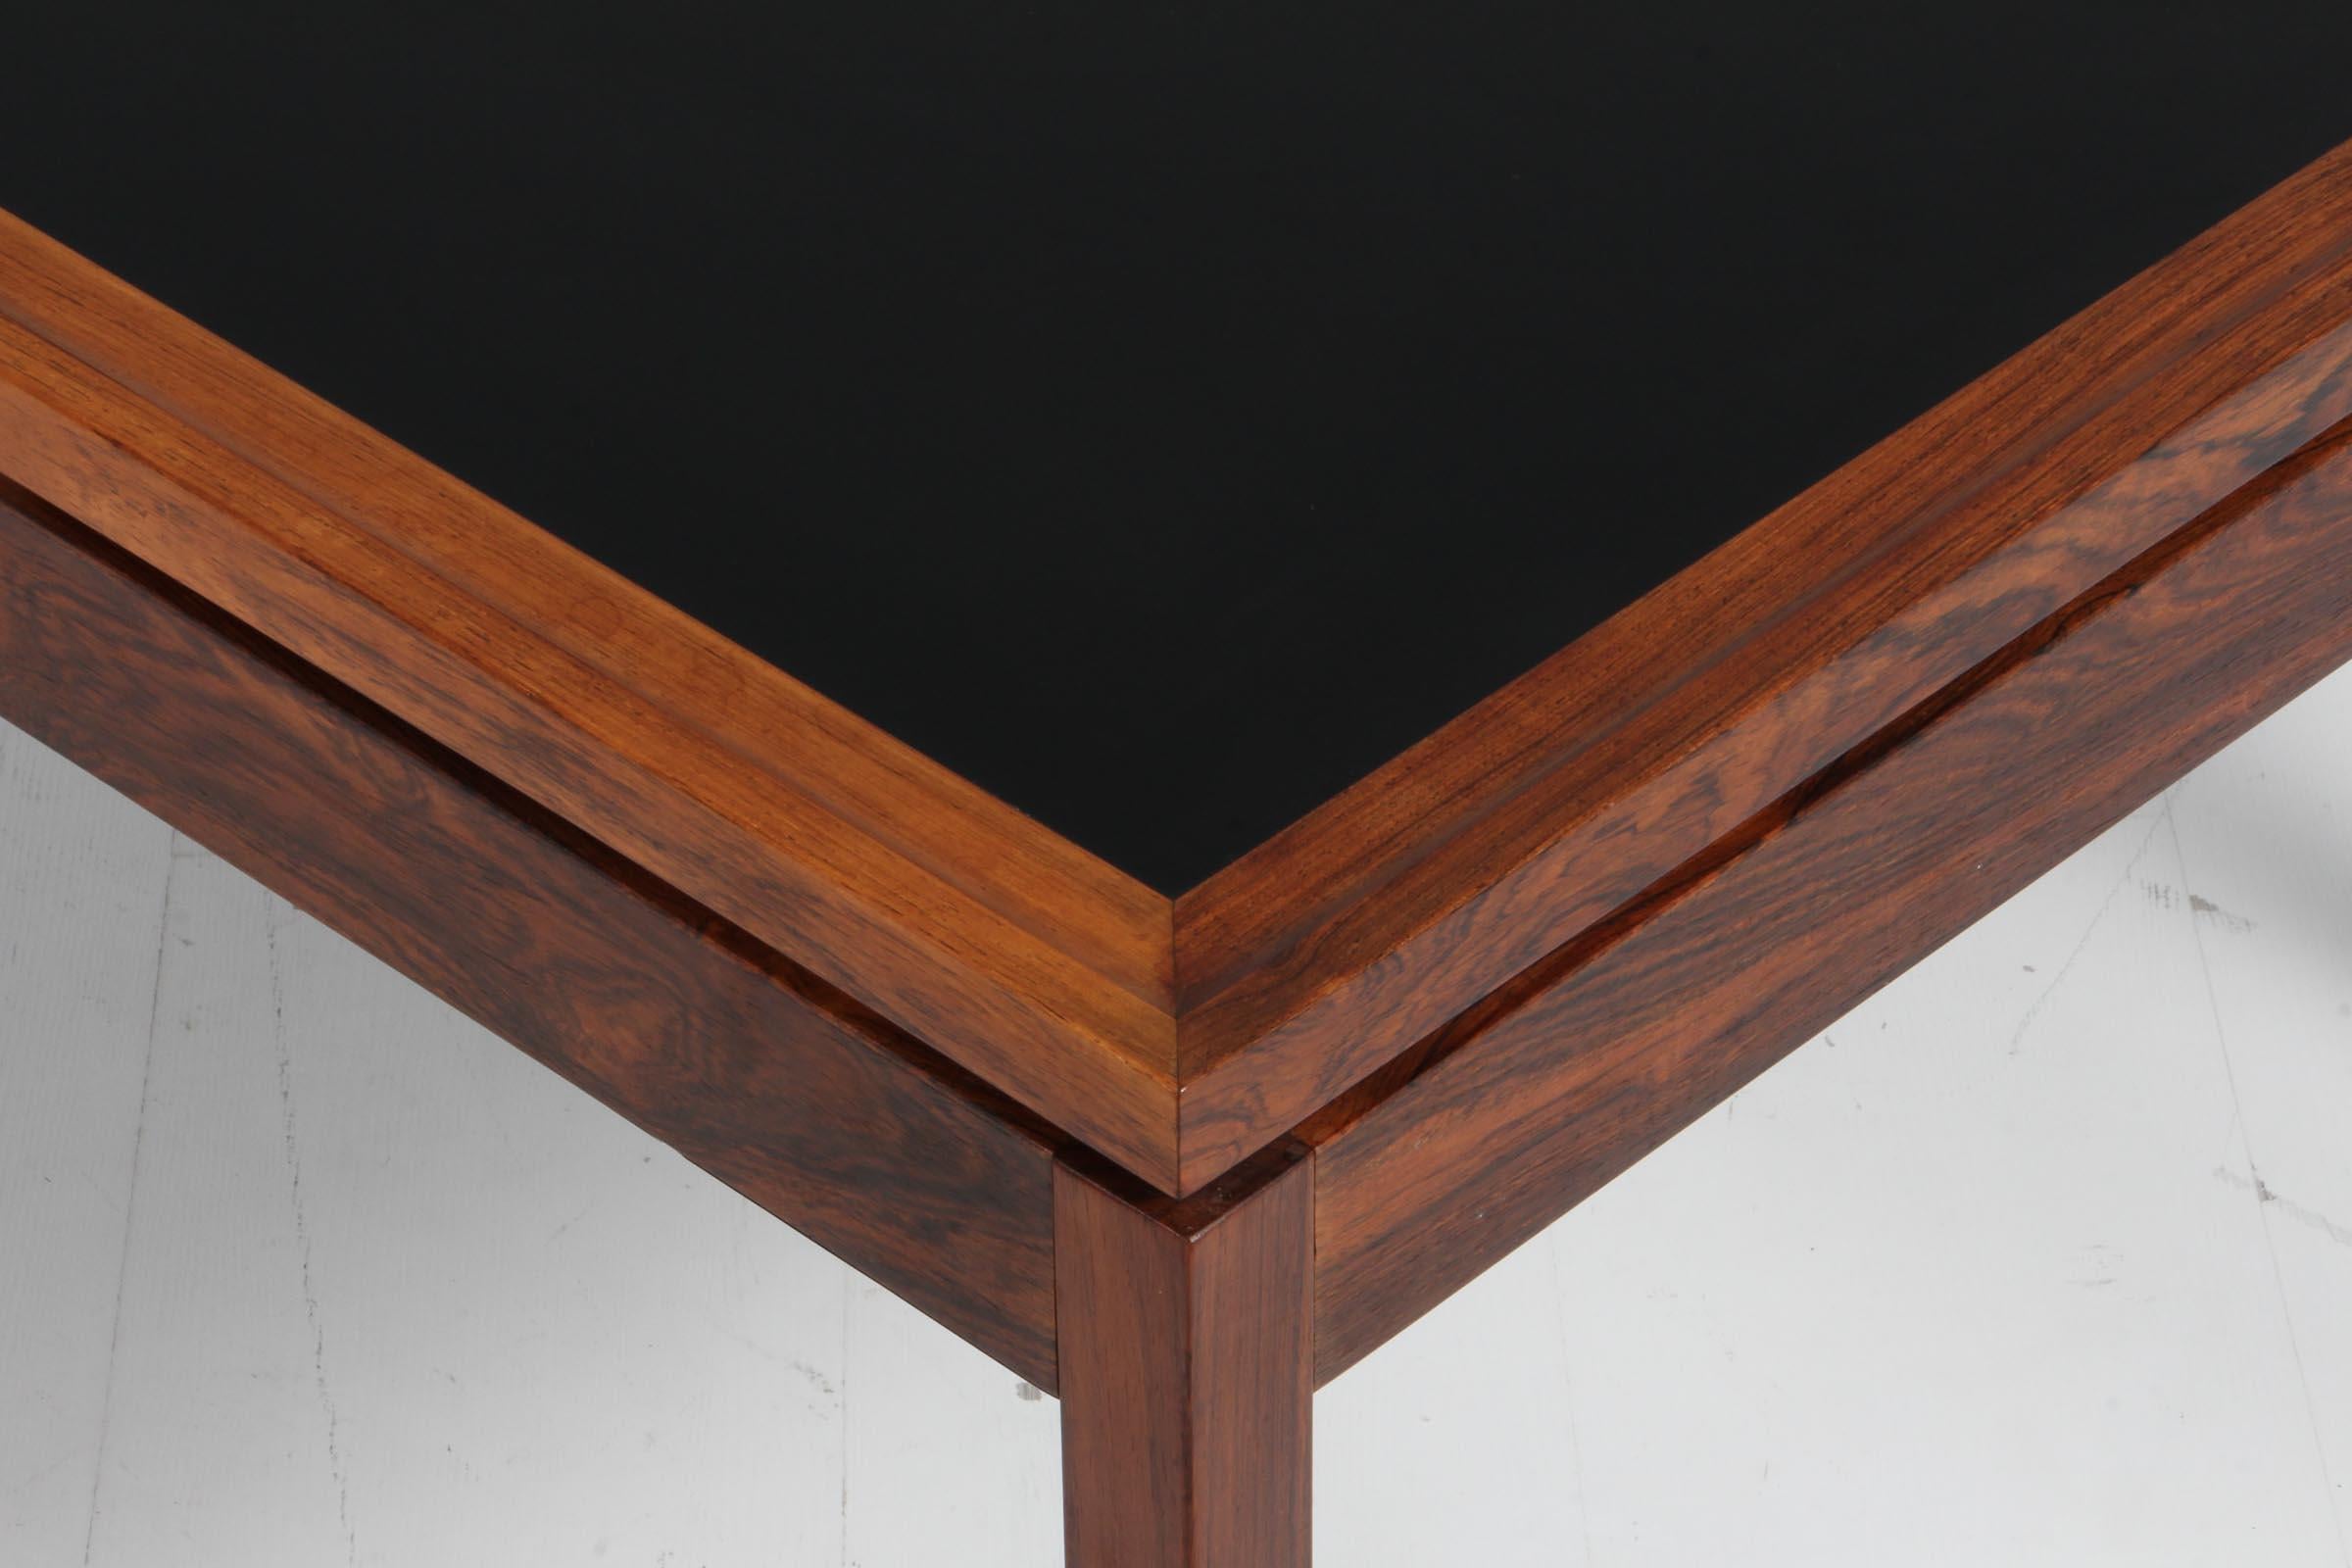 Scandinavian Modern Ejvind A. Johansson coffee table rosewood and black formica, 1960s Denmark For Sale